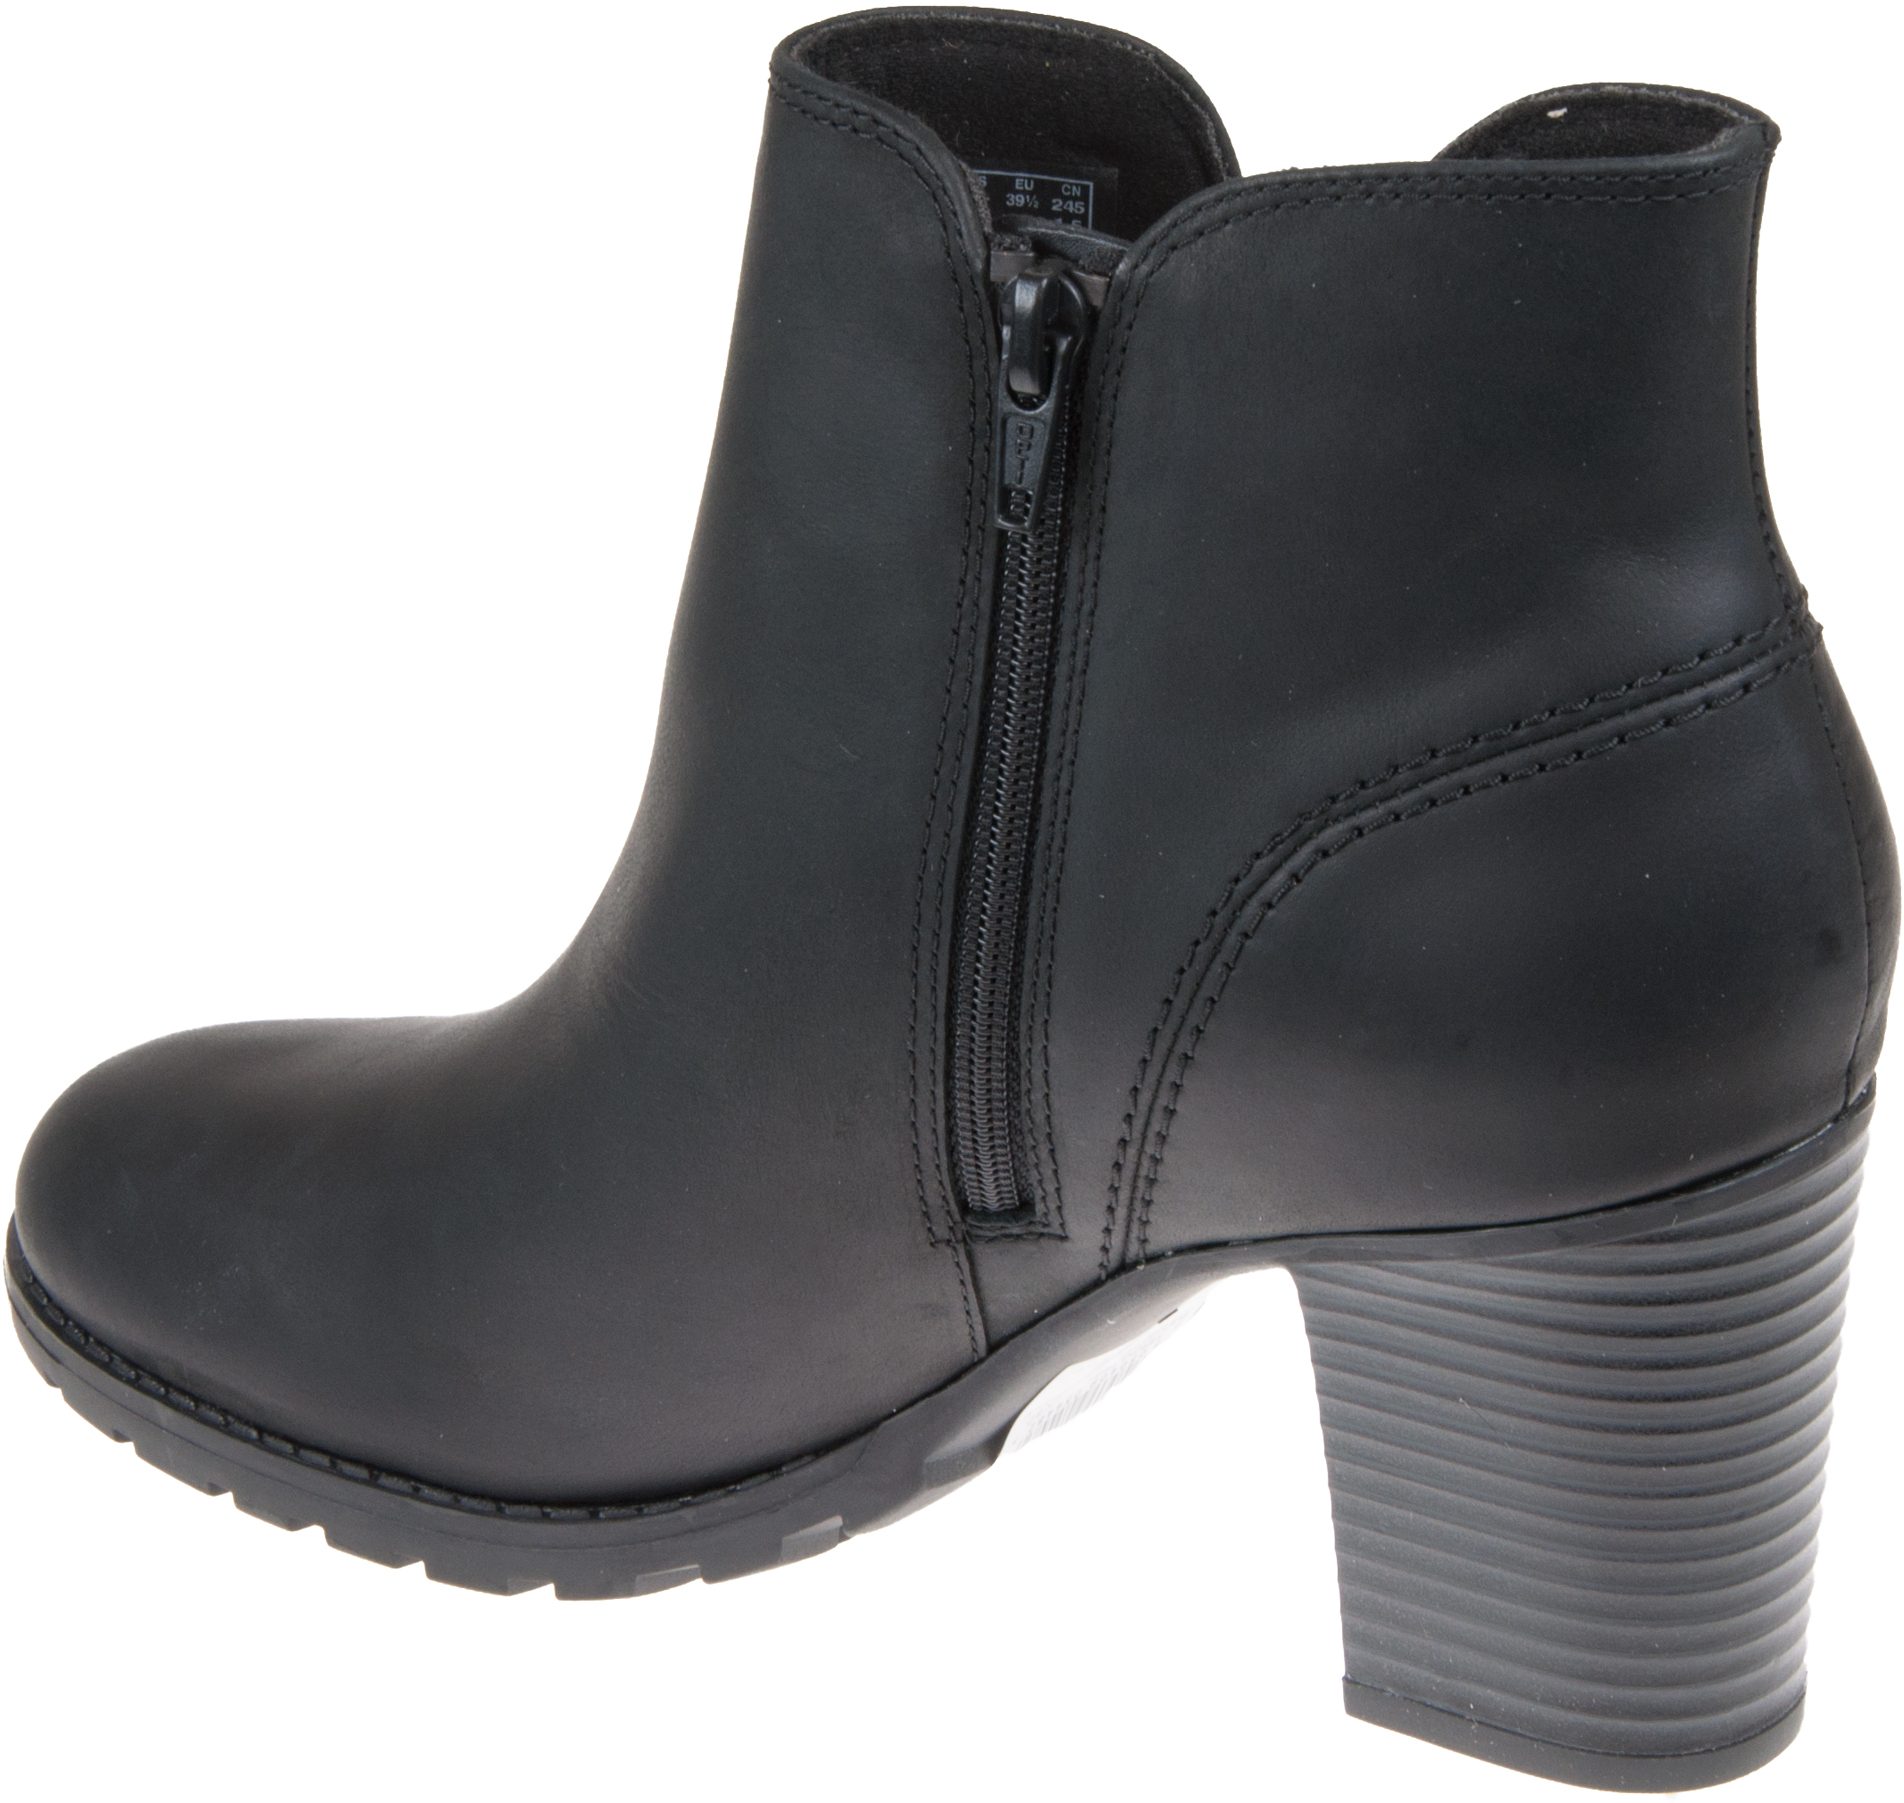 Clarks Verona Trish Black Leather 26137241 - Ankle Boots - Humphries Shoes